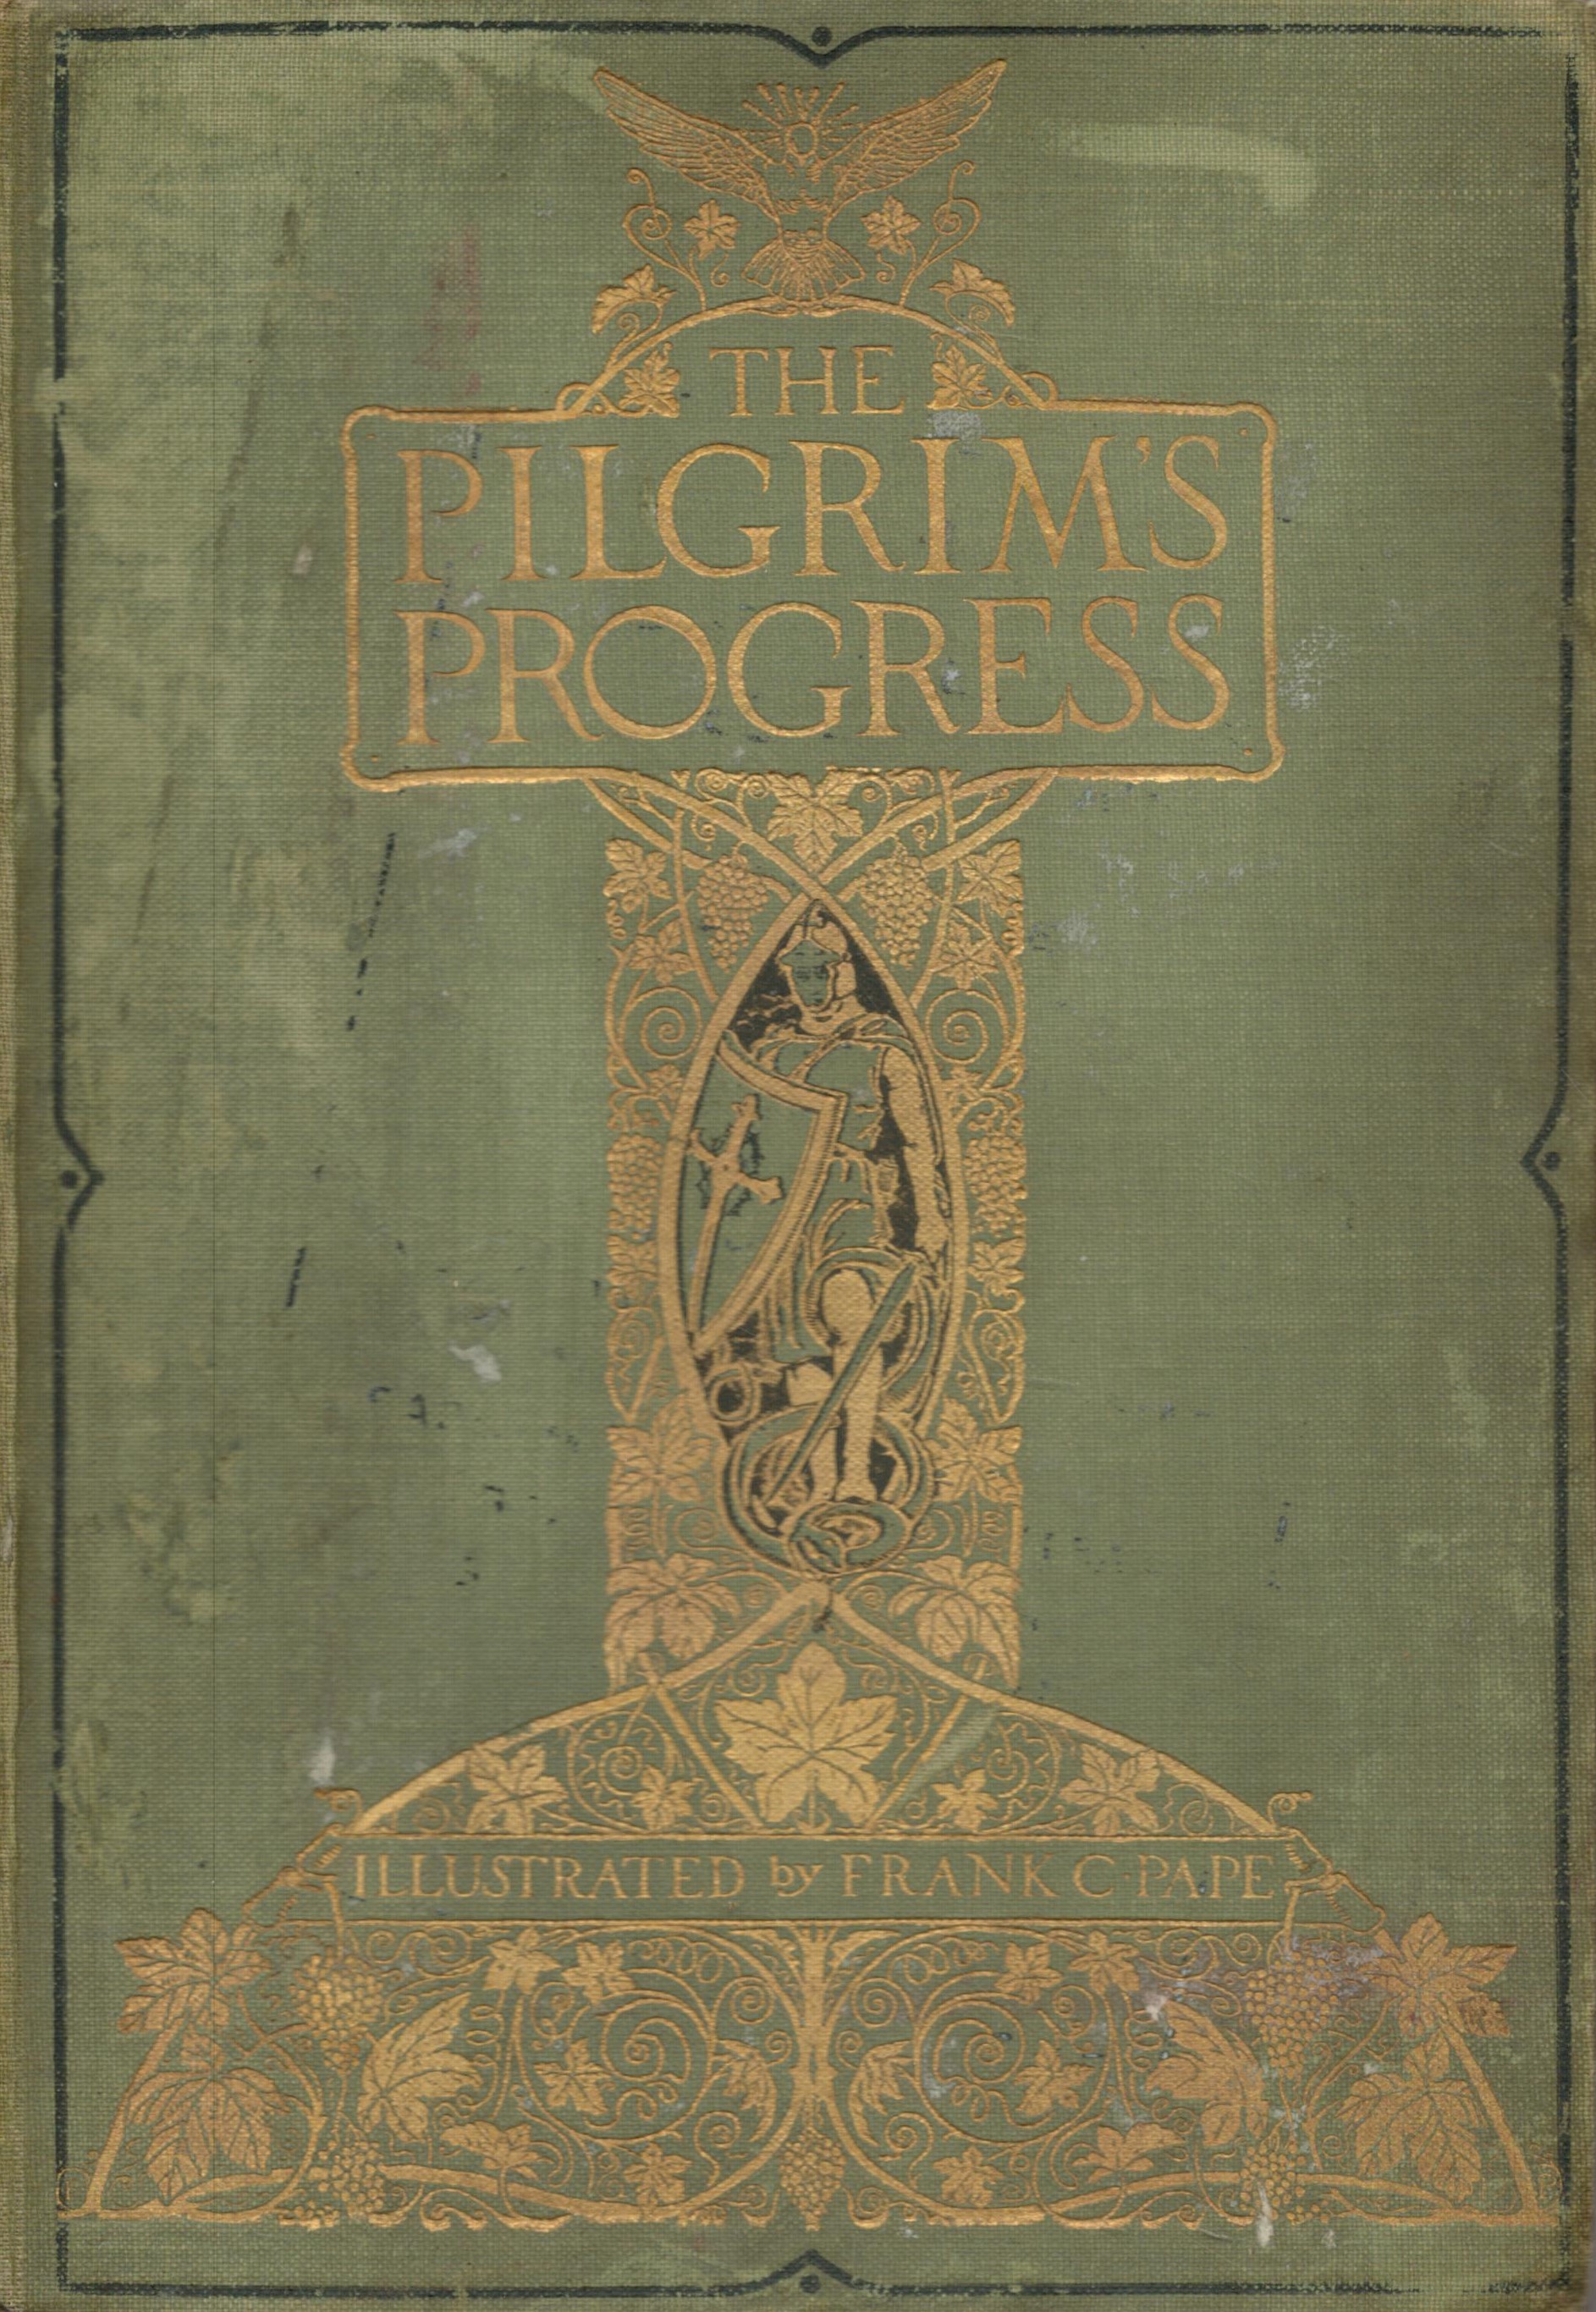 John Bunyan The Pilgrim's Progress. Illustrated by Frank C. Pape. Published by J. M. Dent and Sons